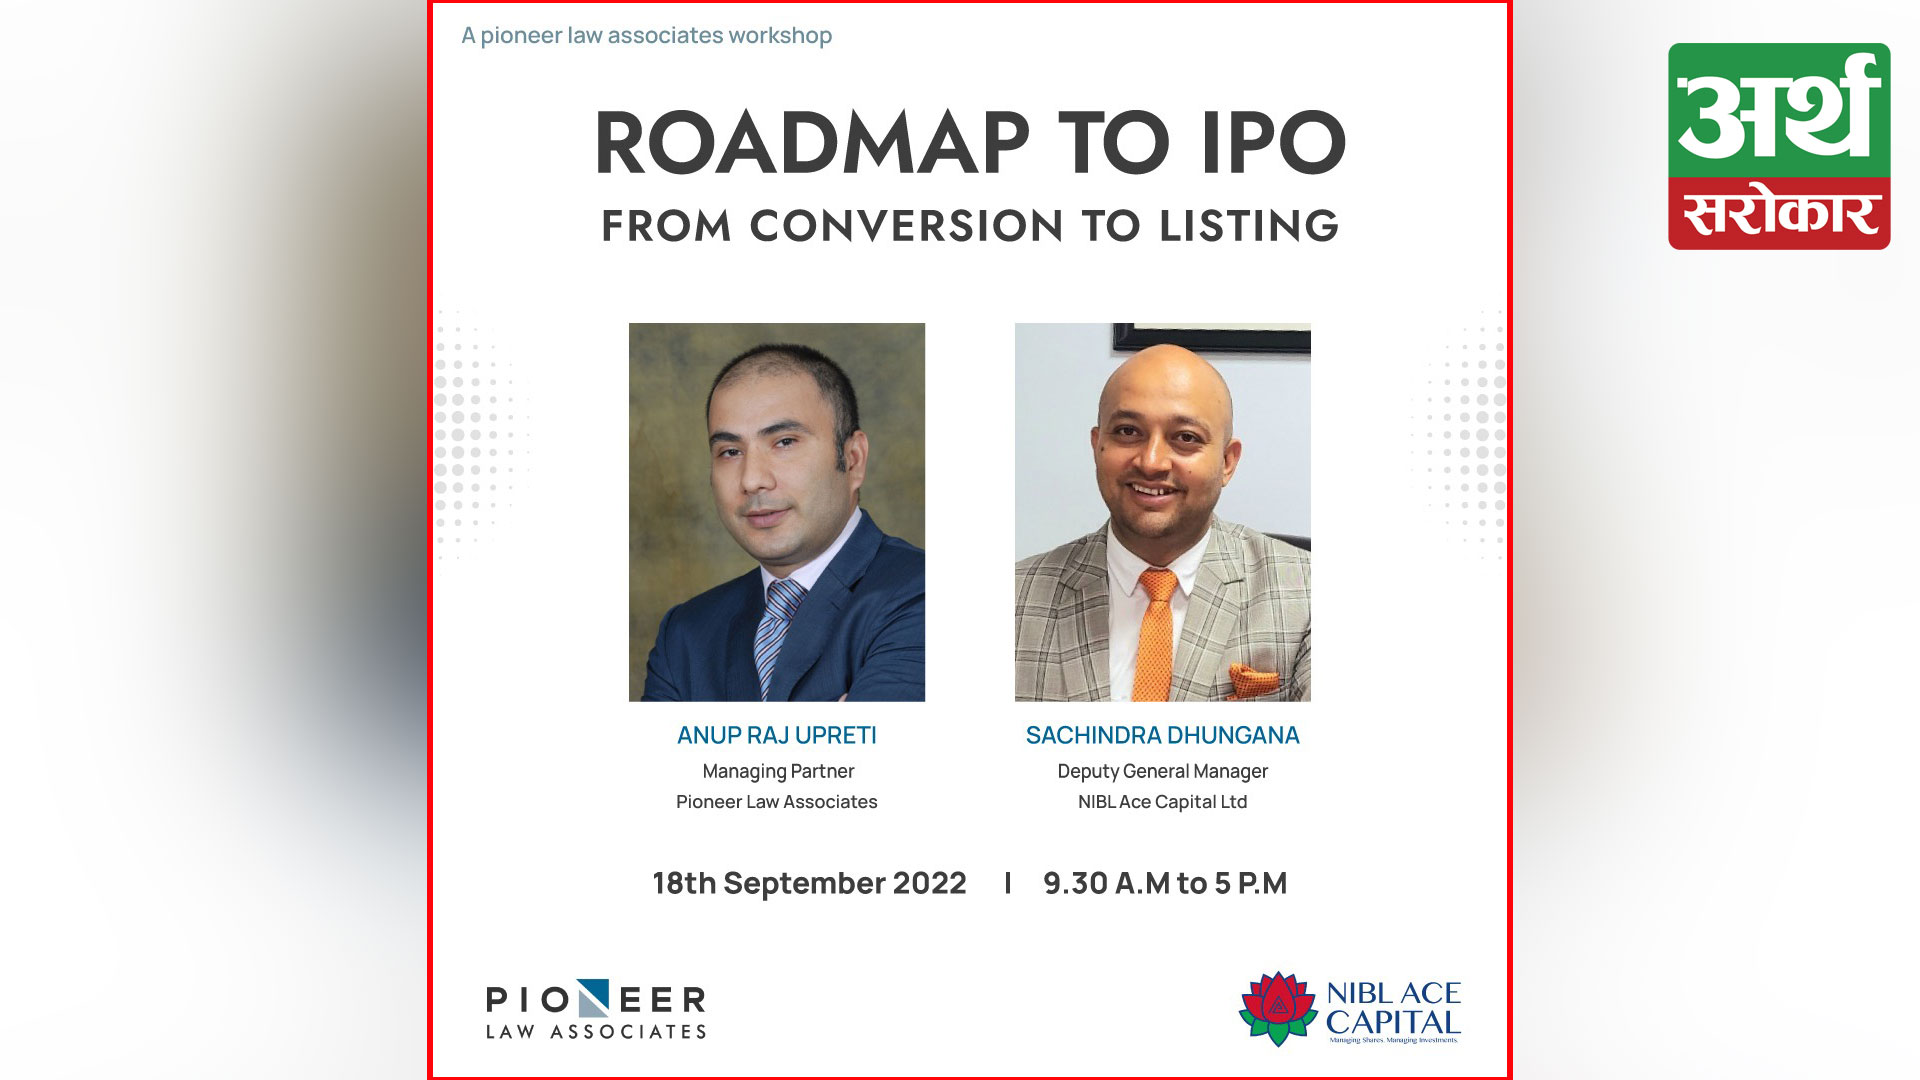 NIBL Ace Capital and Pioneer Law Associates conducted a workshop on ‘Road to IPO’